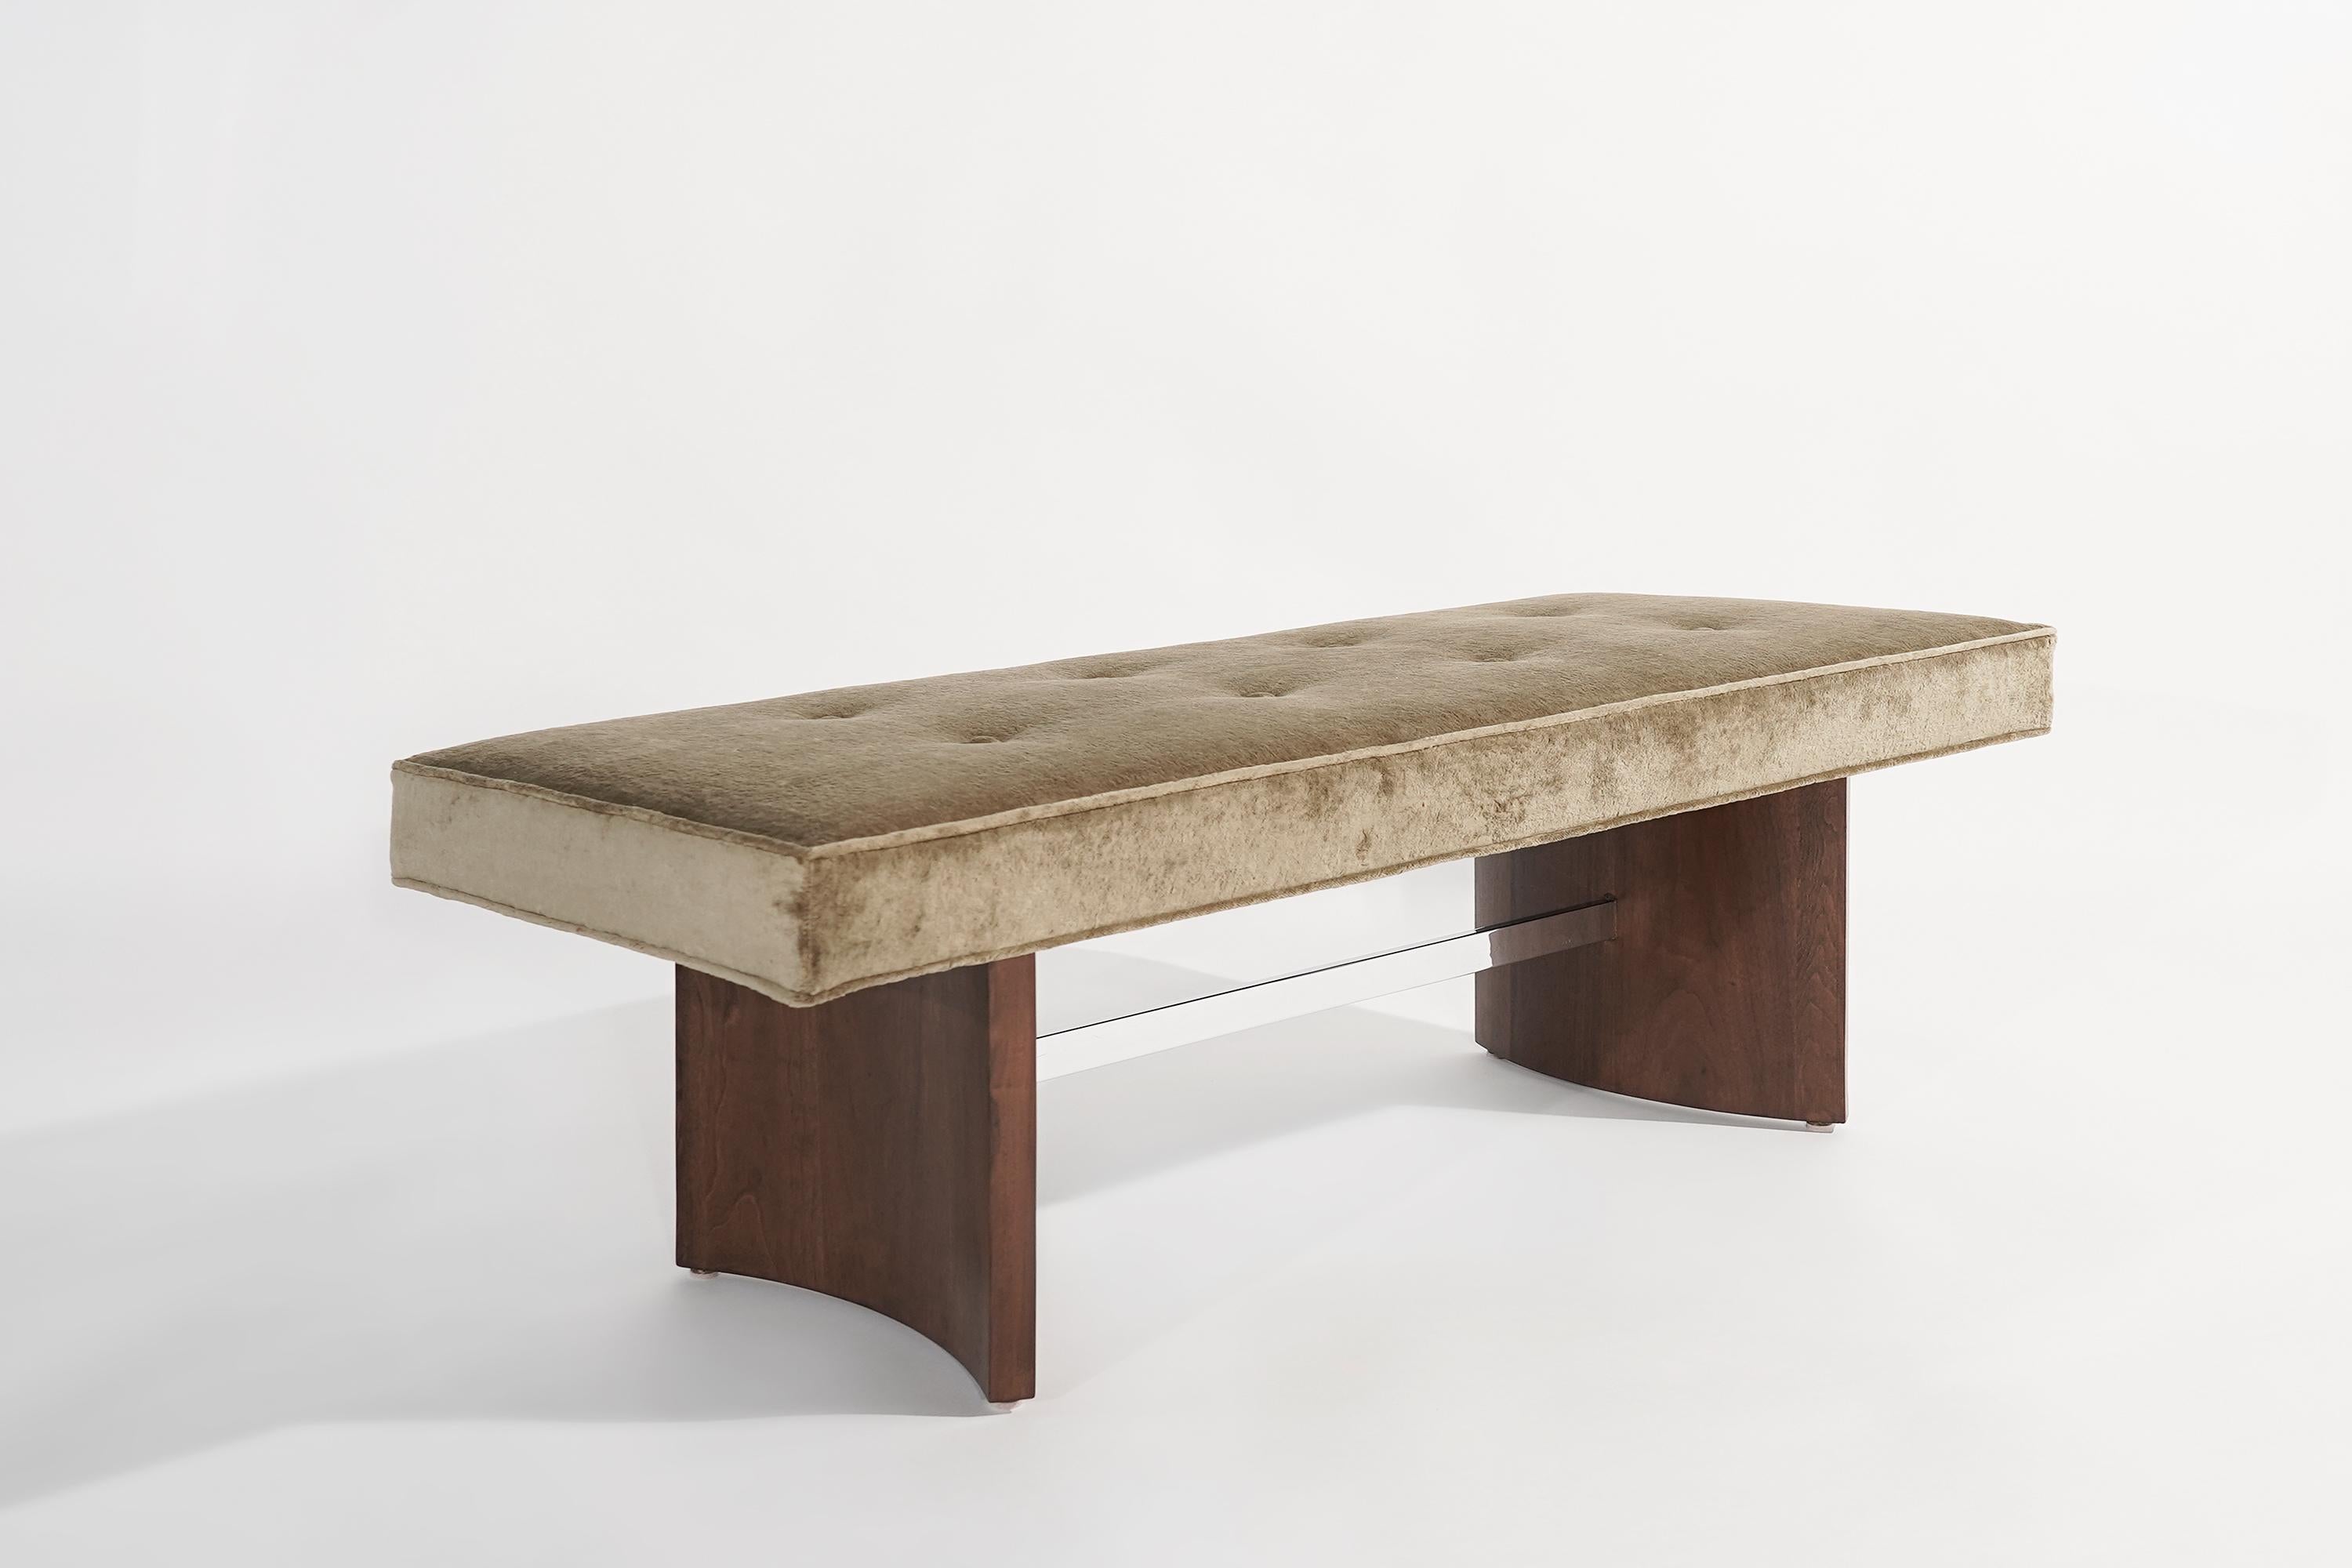 Radius bench by Selig, circa 1950s. Walnut base fully restored, nickel stretcher in excellent condition. Newly upholstered in distressed linen velvet by Holly Hunt.

Other designers working in the organic style include Gio Ponti, Jean Royere, Paul